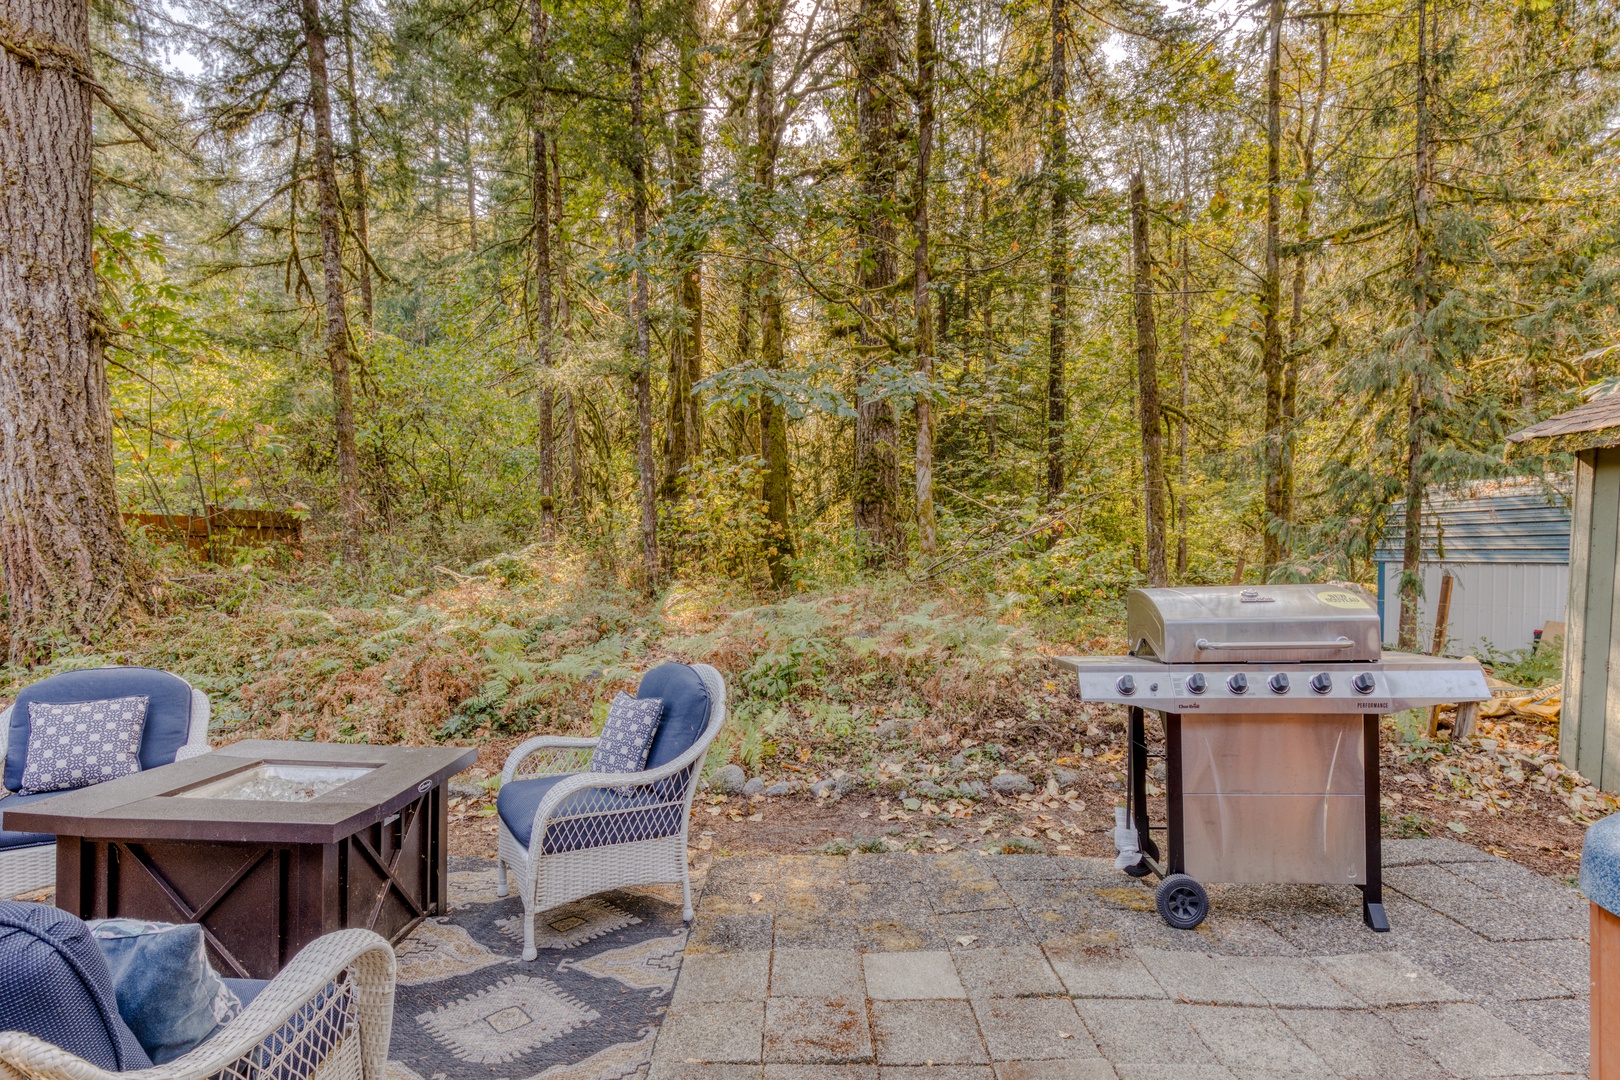 Brightwood Vacation Rentals, Riverside Retreat - Complete with outdoor seating, a fire pit, and a grill